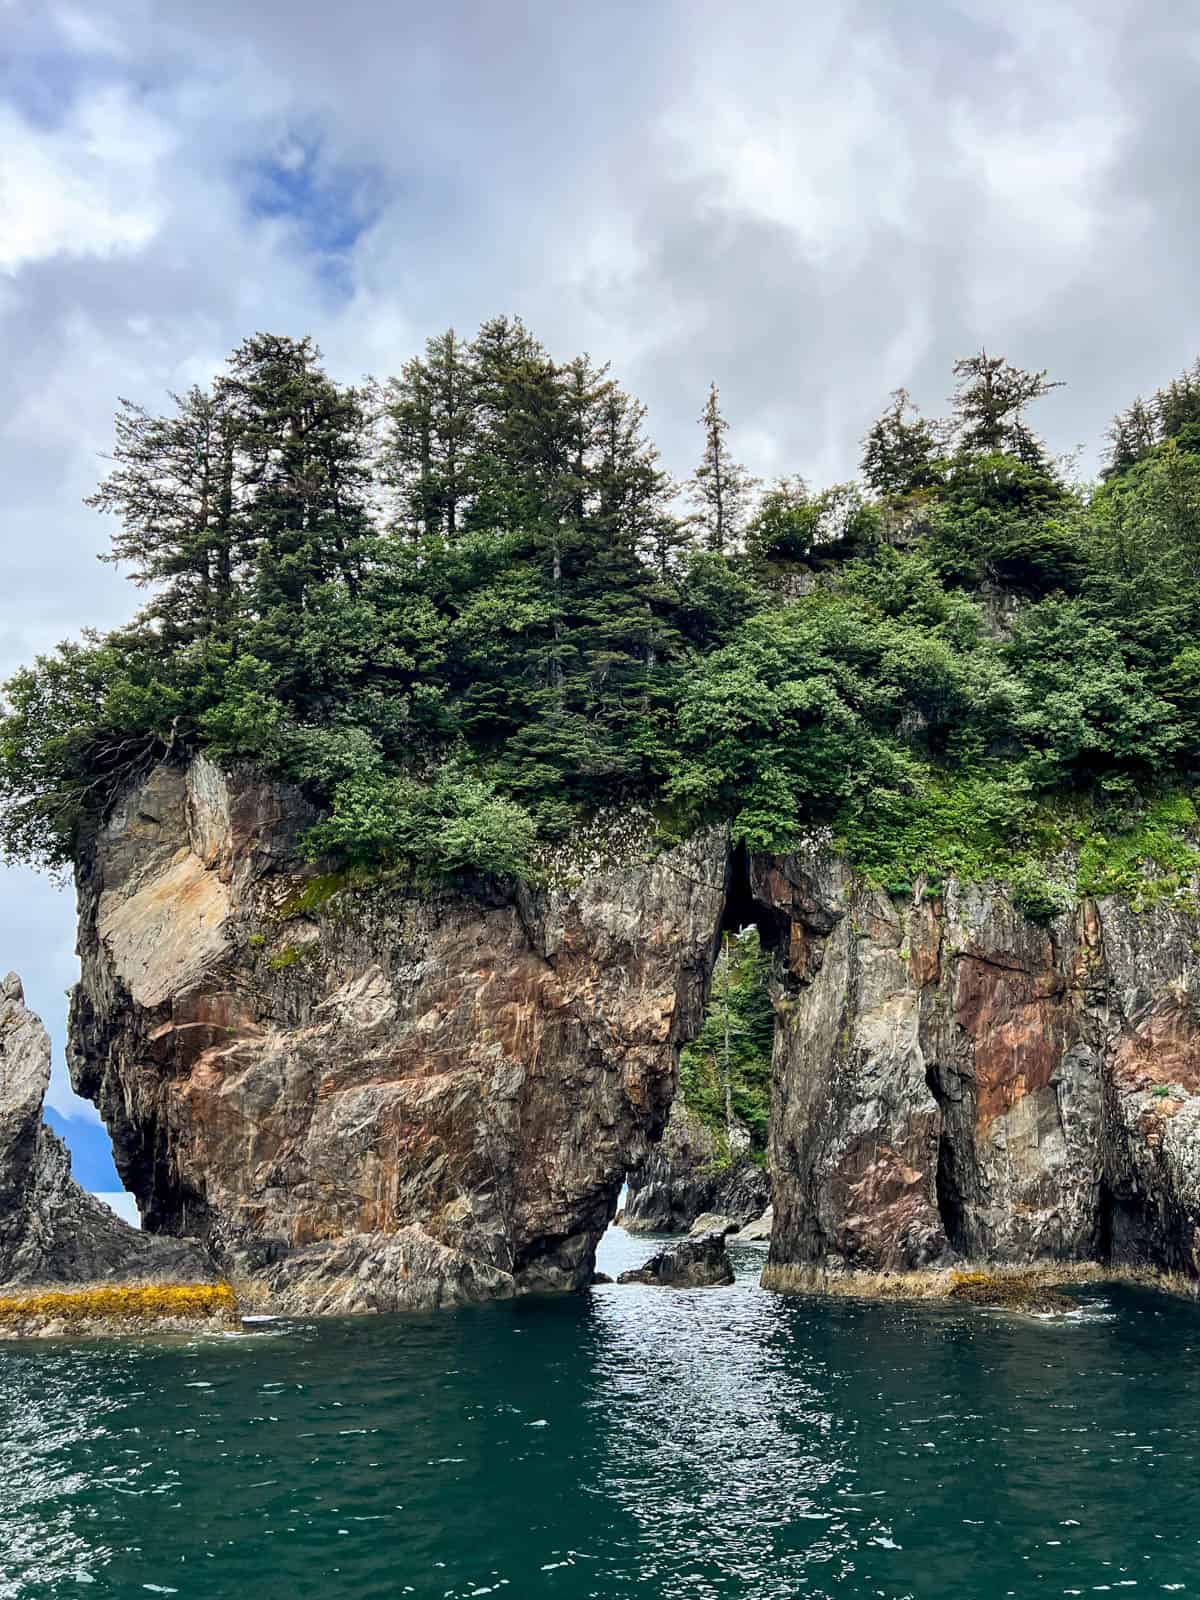 A rock formation with an arch over the water in Kenai Fjiords National Park.